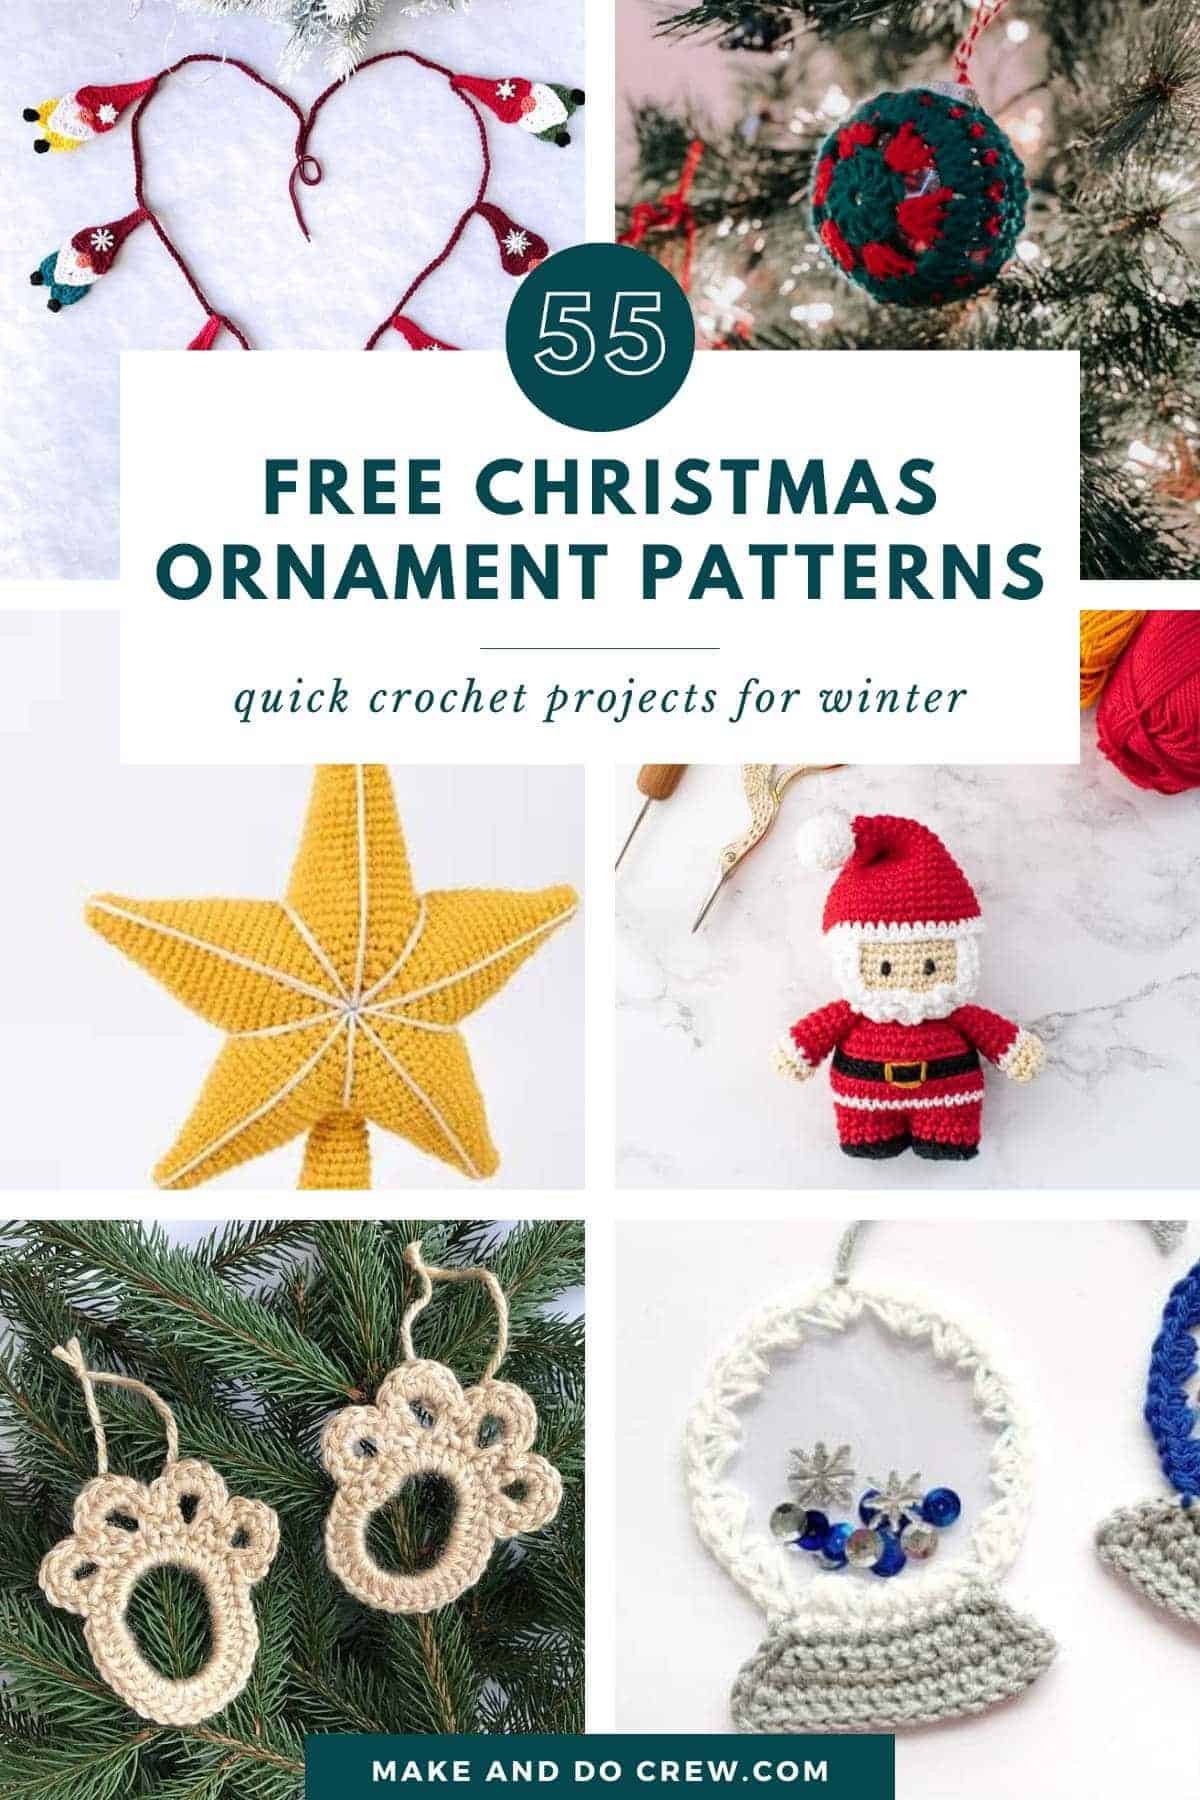 Collection of 55 free Christmas ornament crochet patterns.